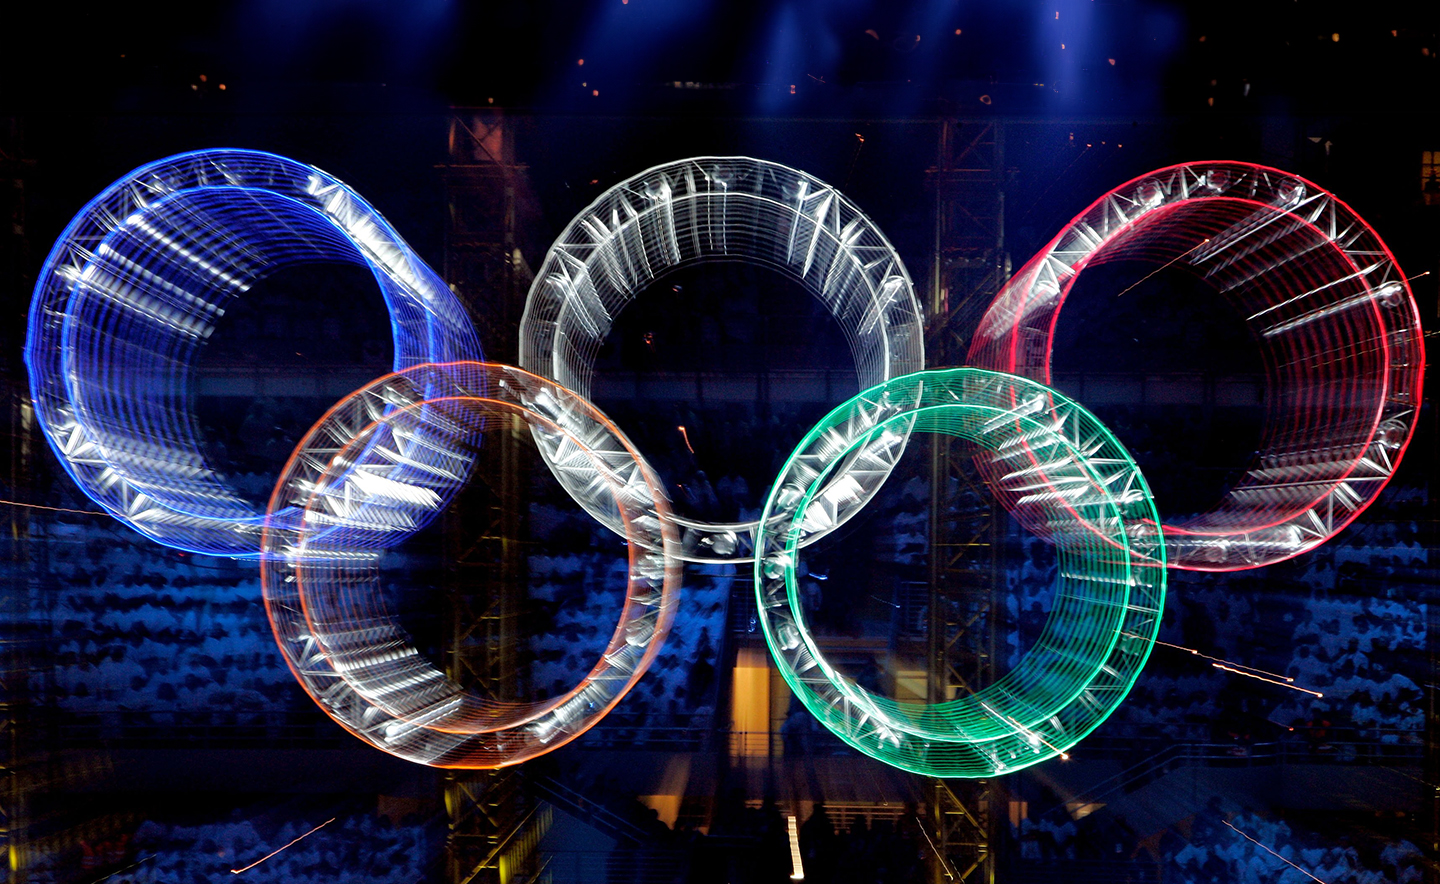 The five Olympic rings